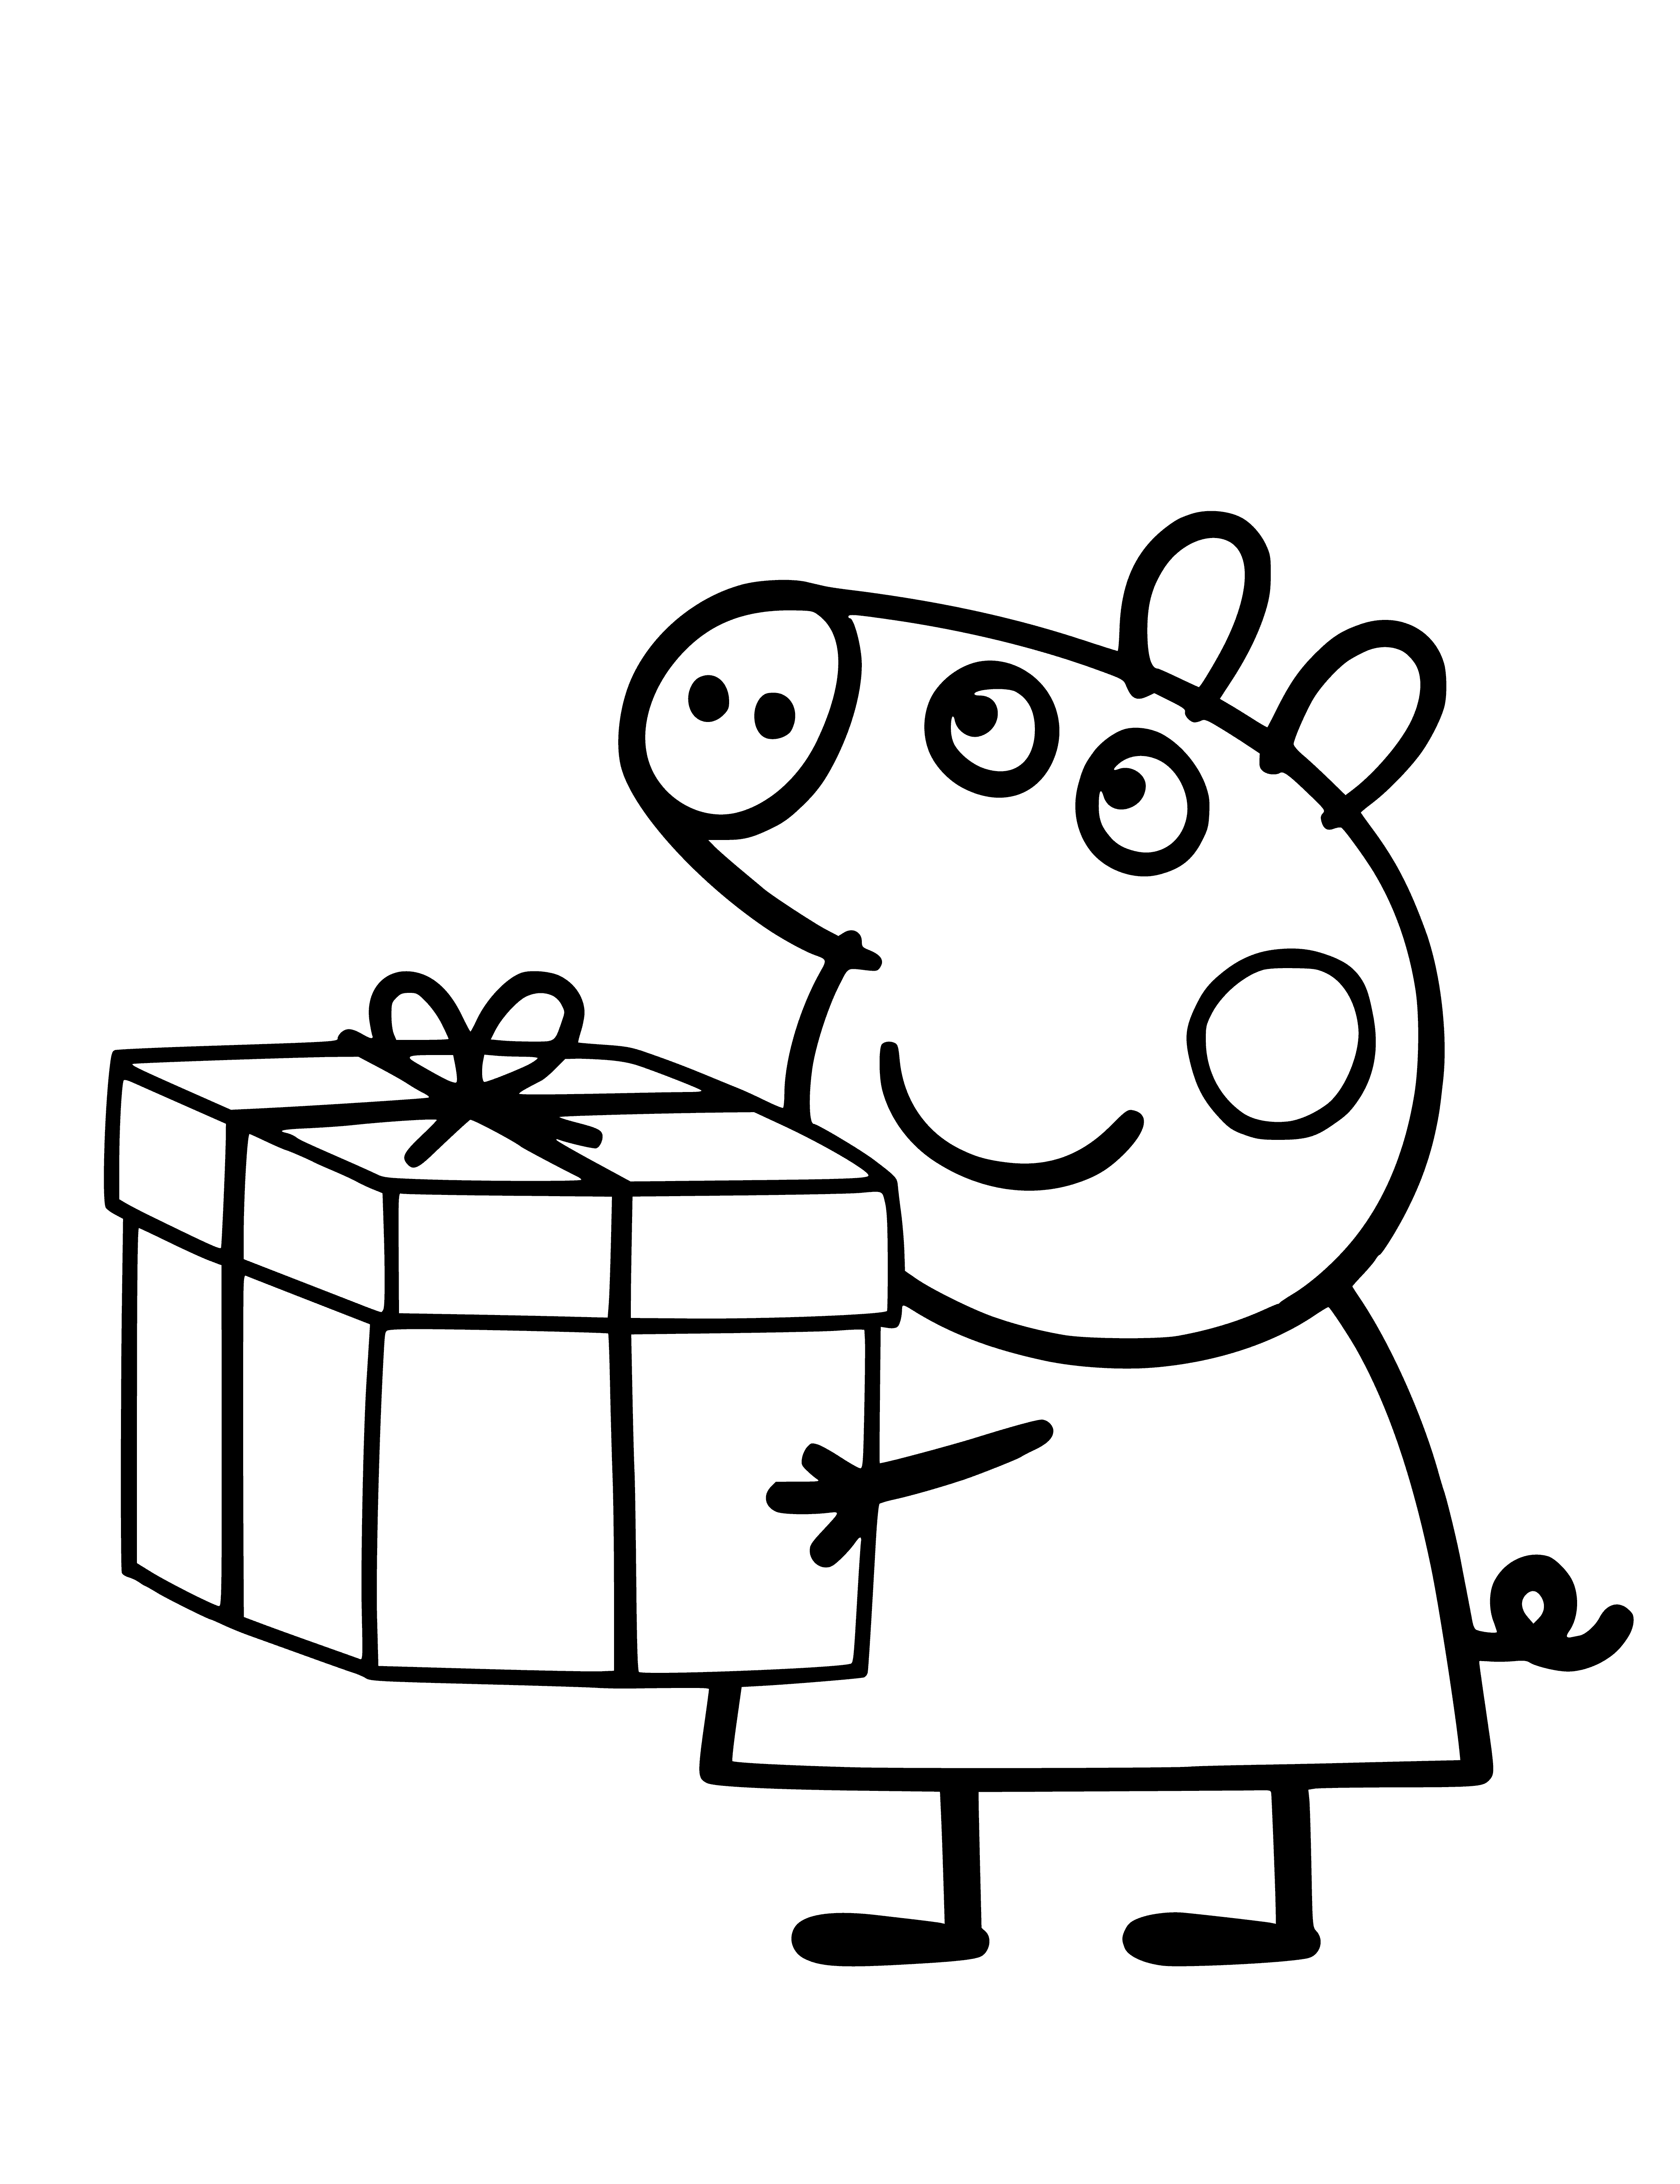 coloring page: 3 piglets wearing bows: 1 holding present, 2 waiting; making gift giving fun for kids.